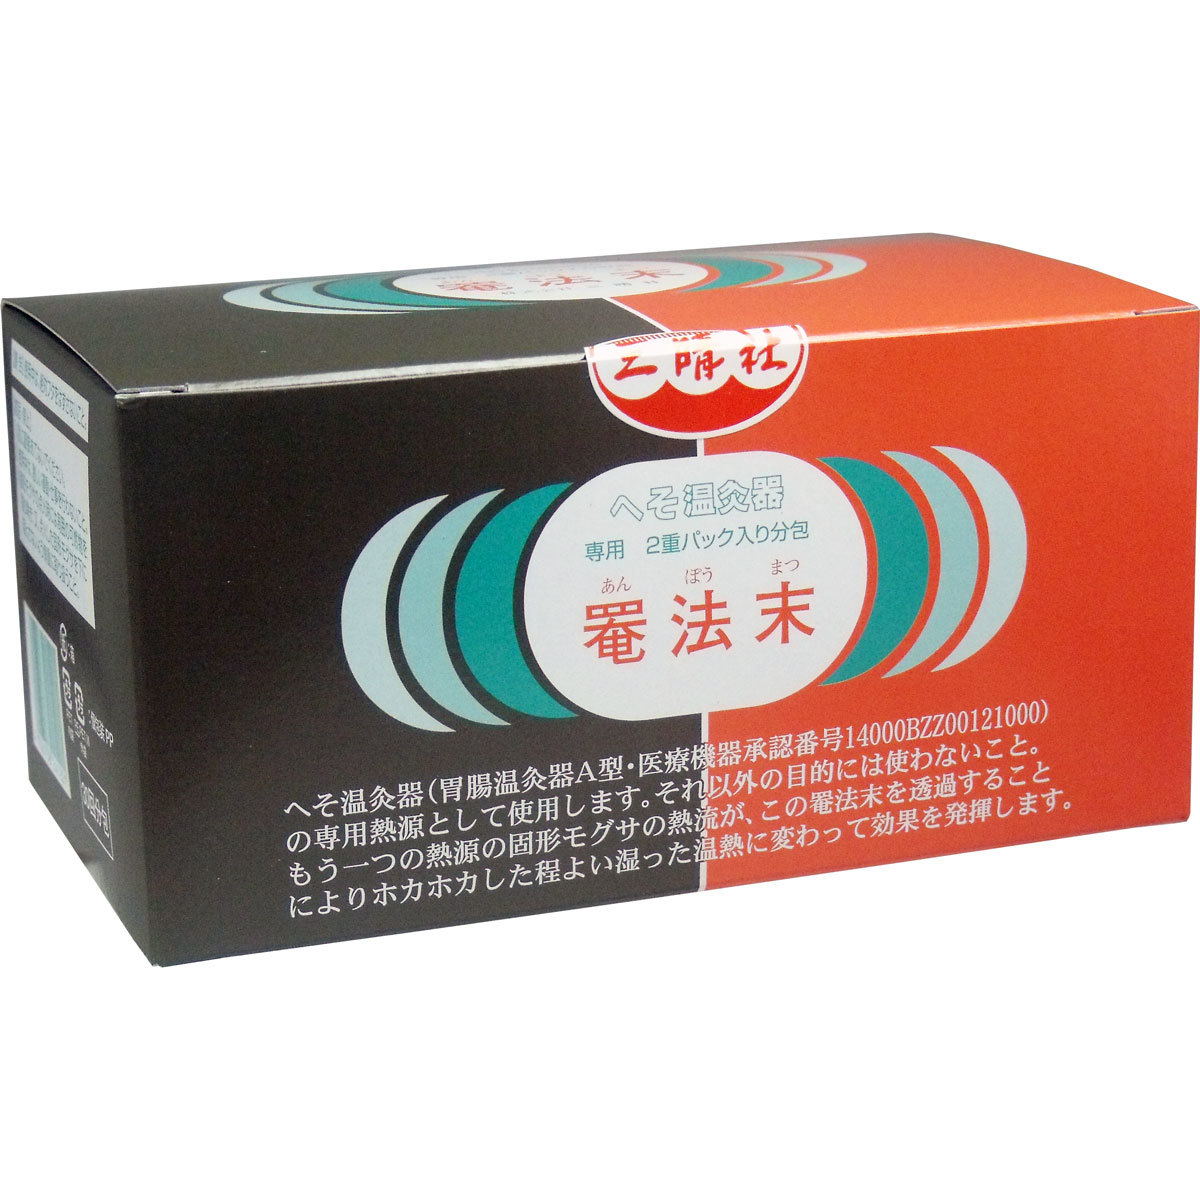 he. temperature moxibustion vessel exclusive use . law end 30 batch ./k